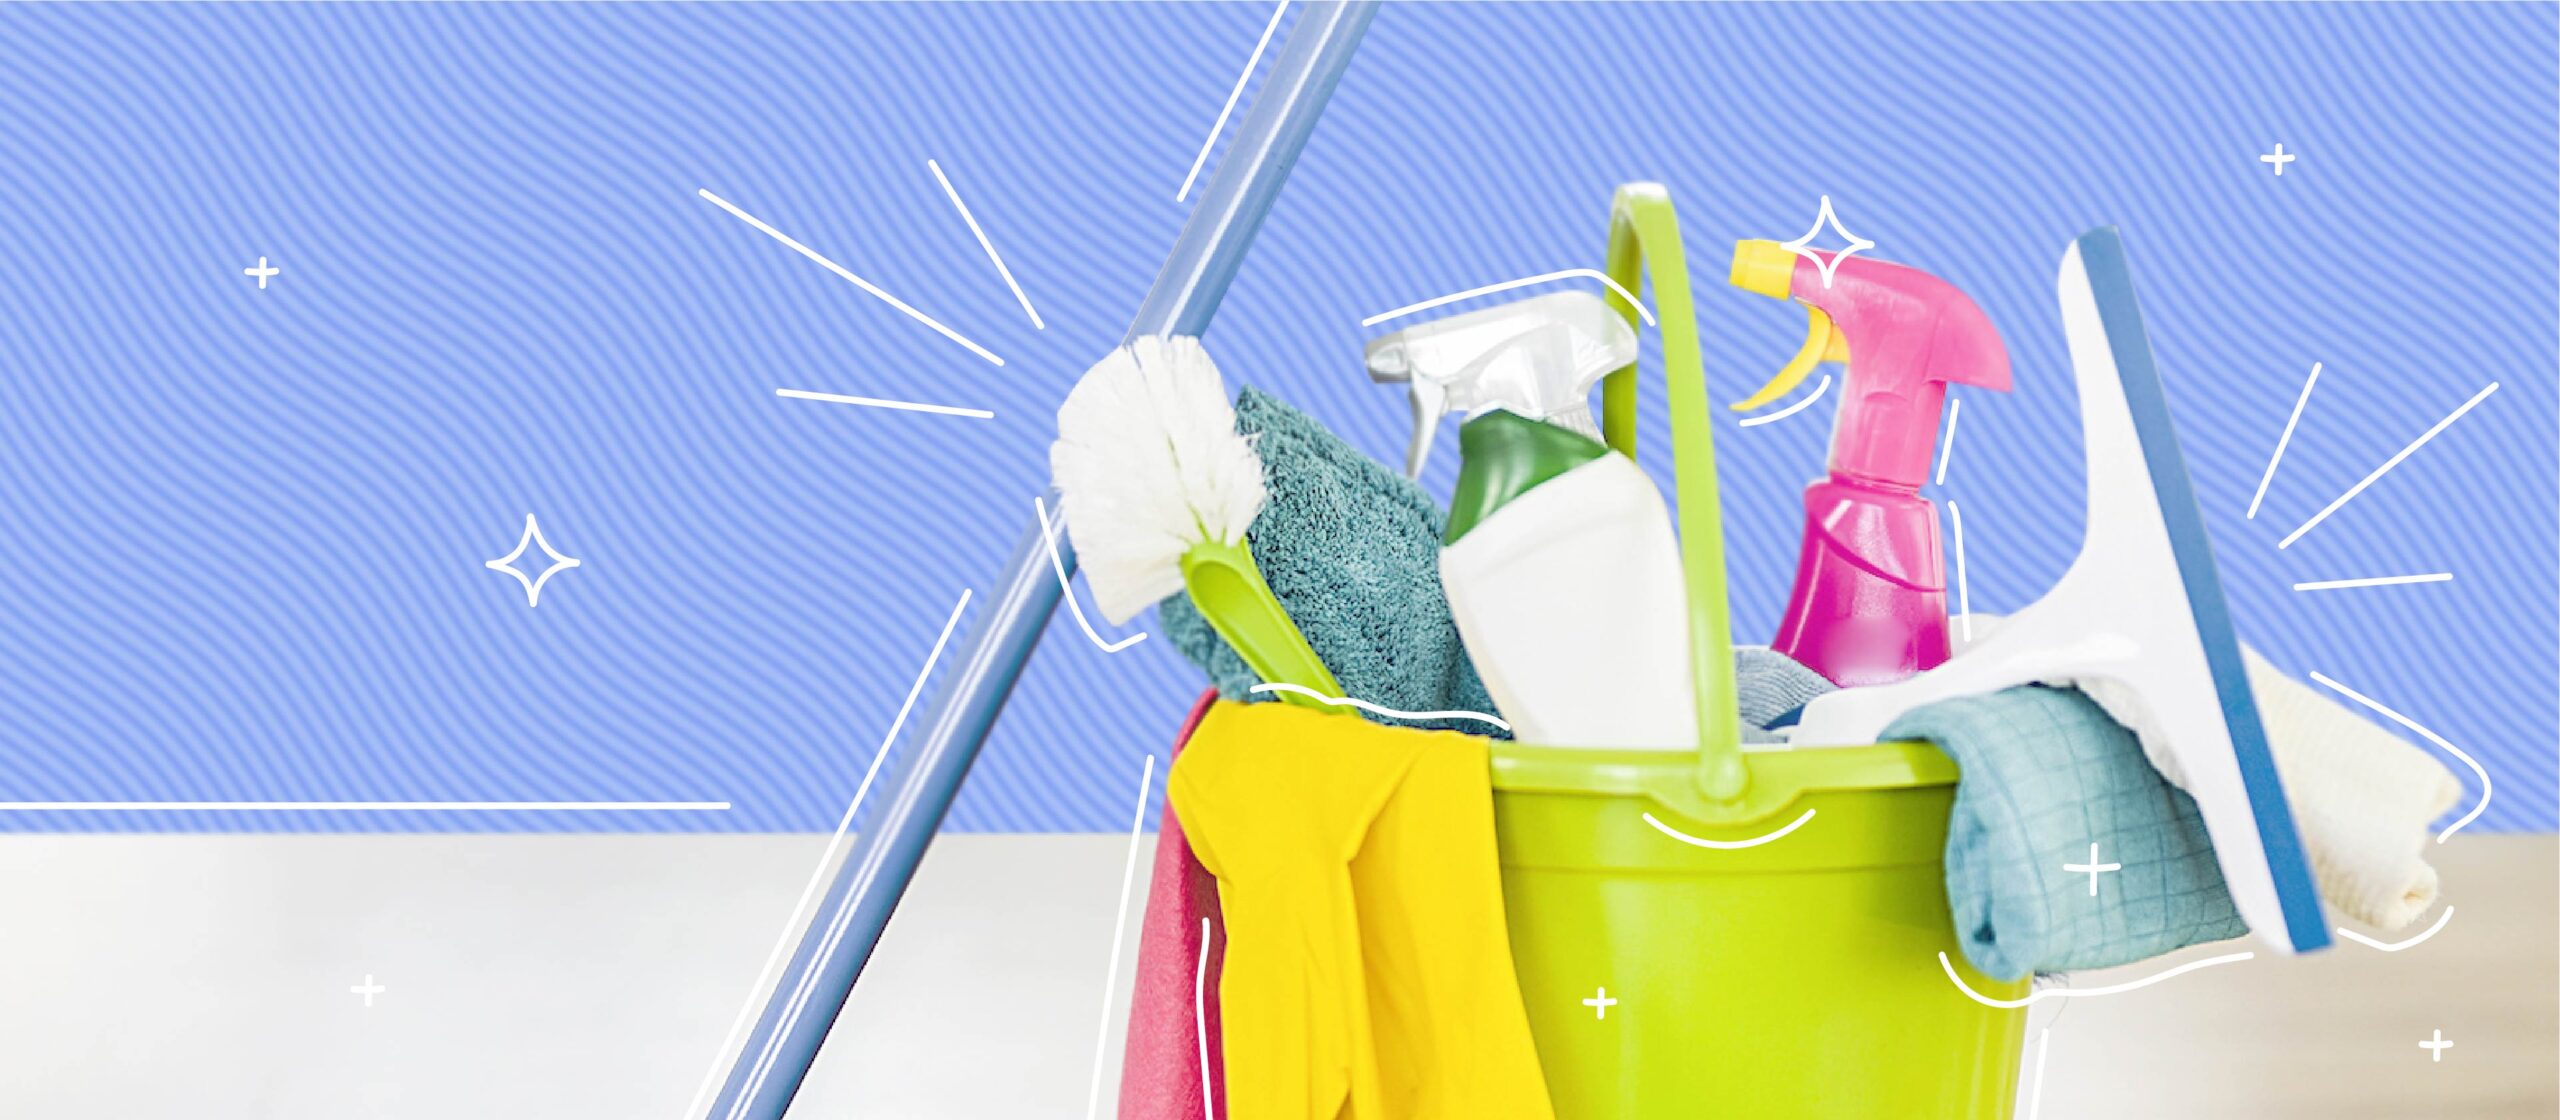 How To Choose The Right Residential Cleaning Service For Your Home